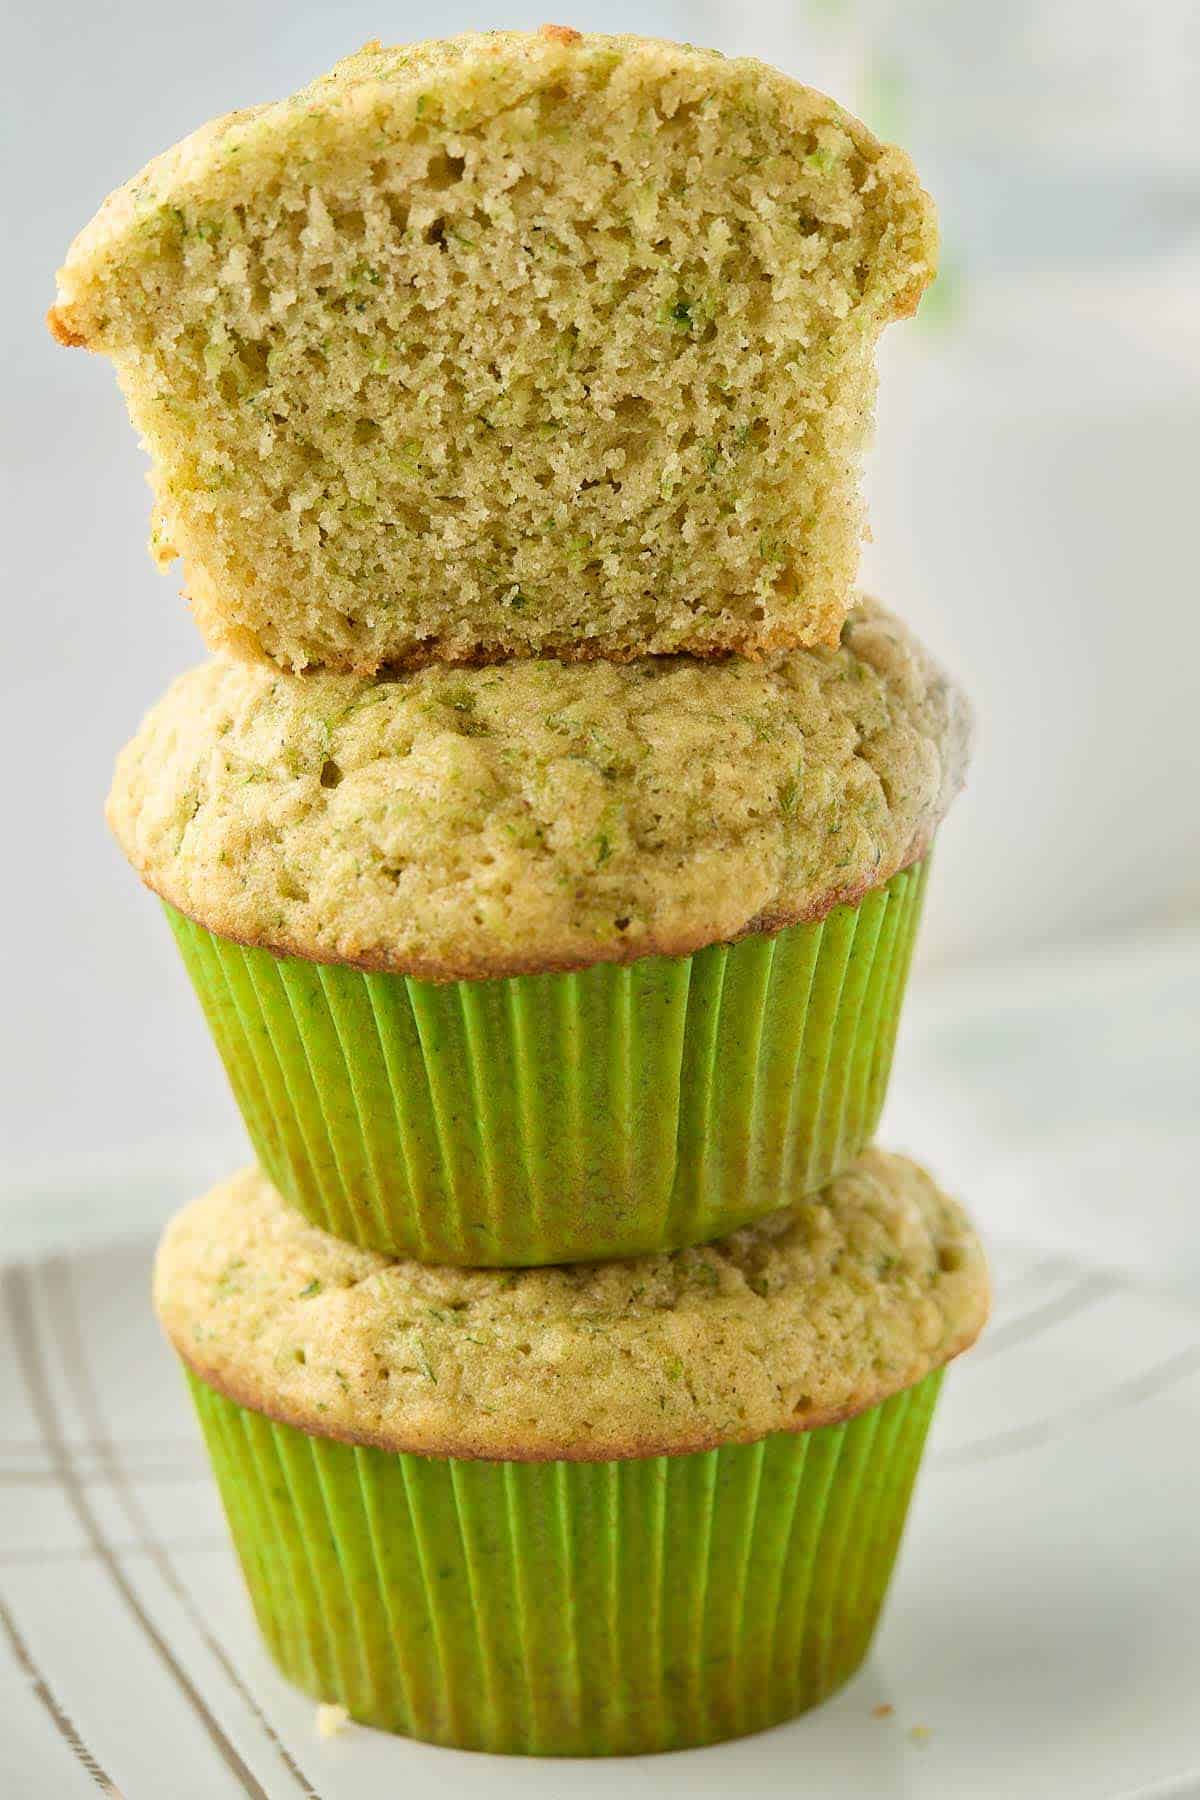 Stacked breakfast zucchini muffins with the top muffin cut in half to see the interior.